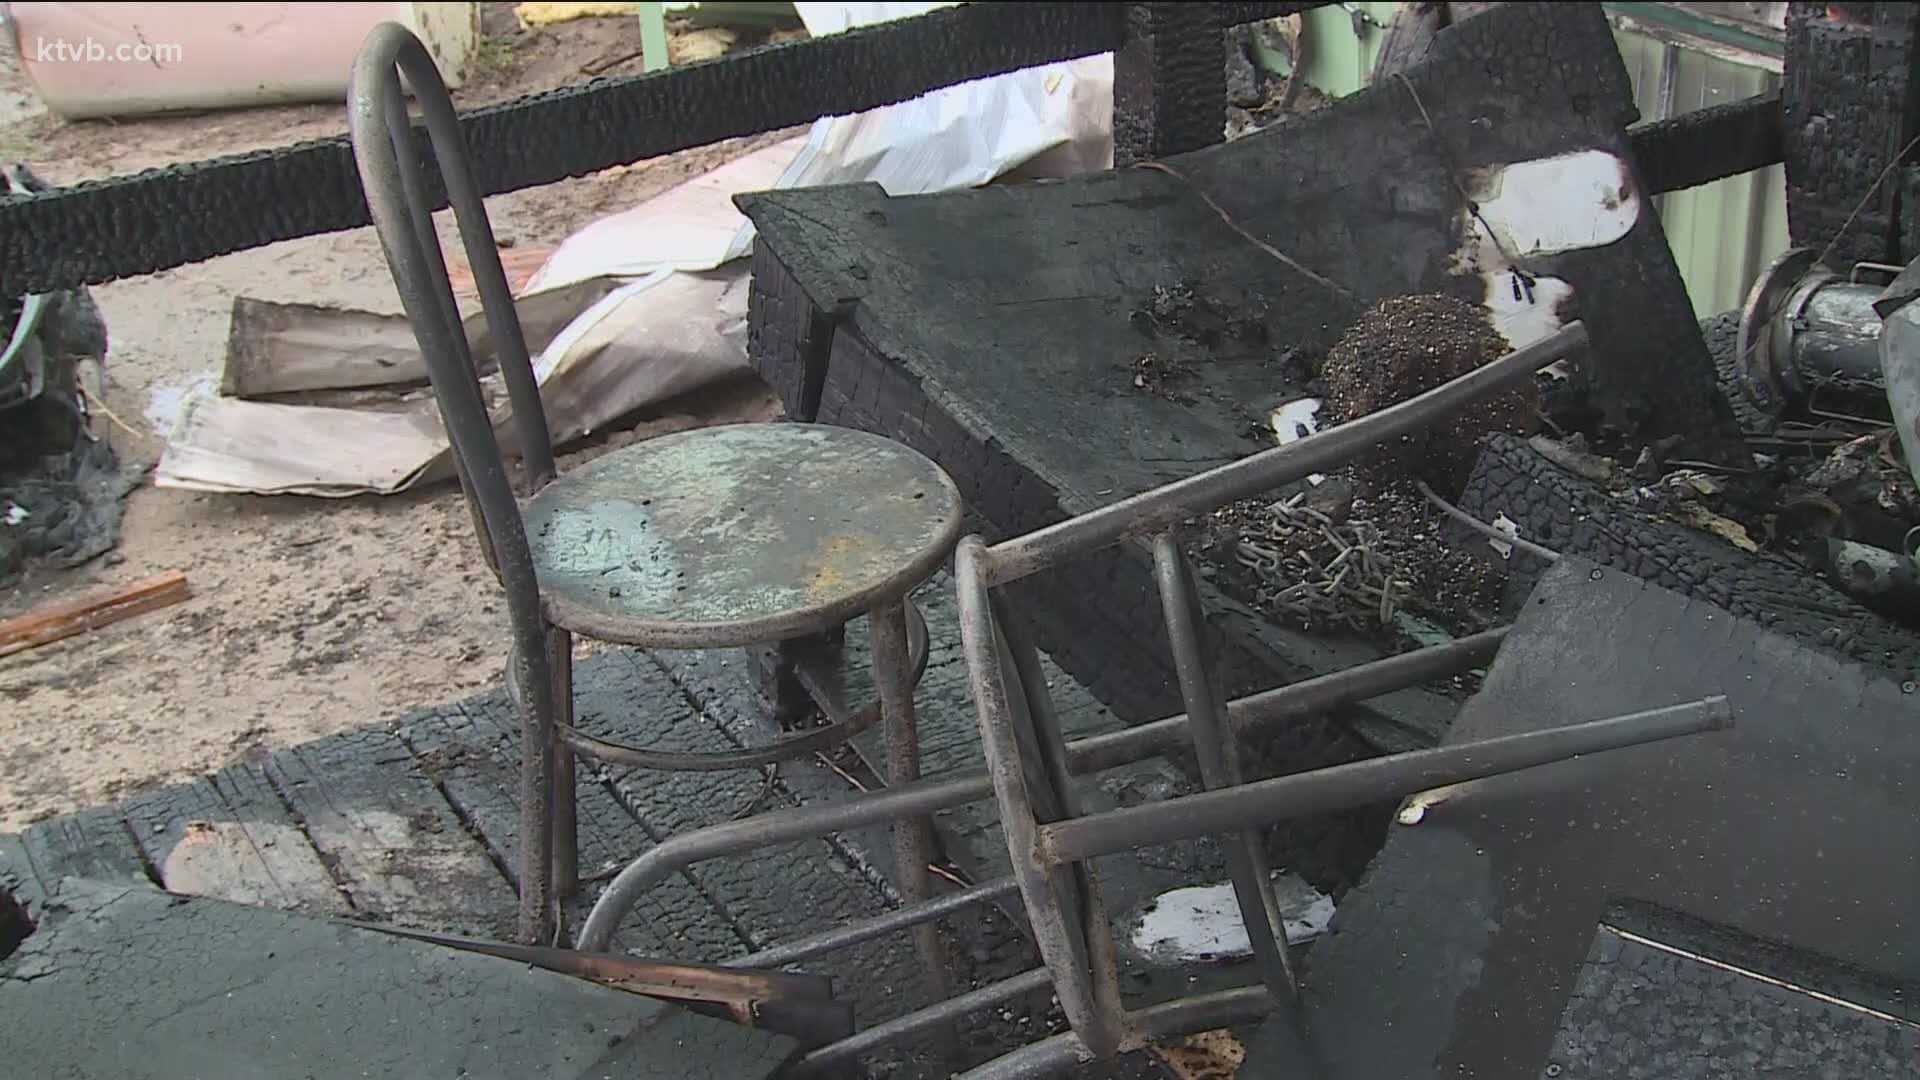 No one was inside the home during the fire but four out of the five pets there did not survive.